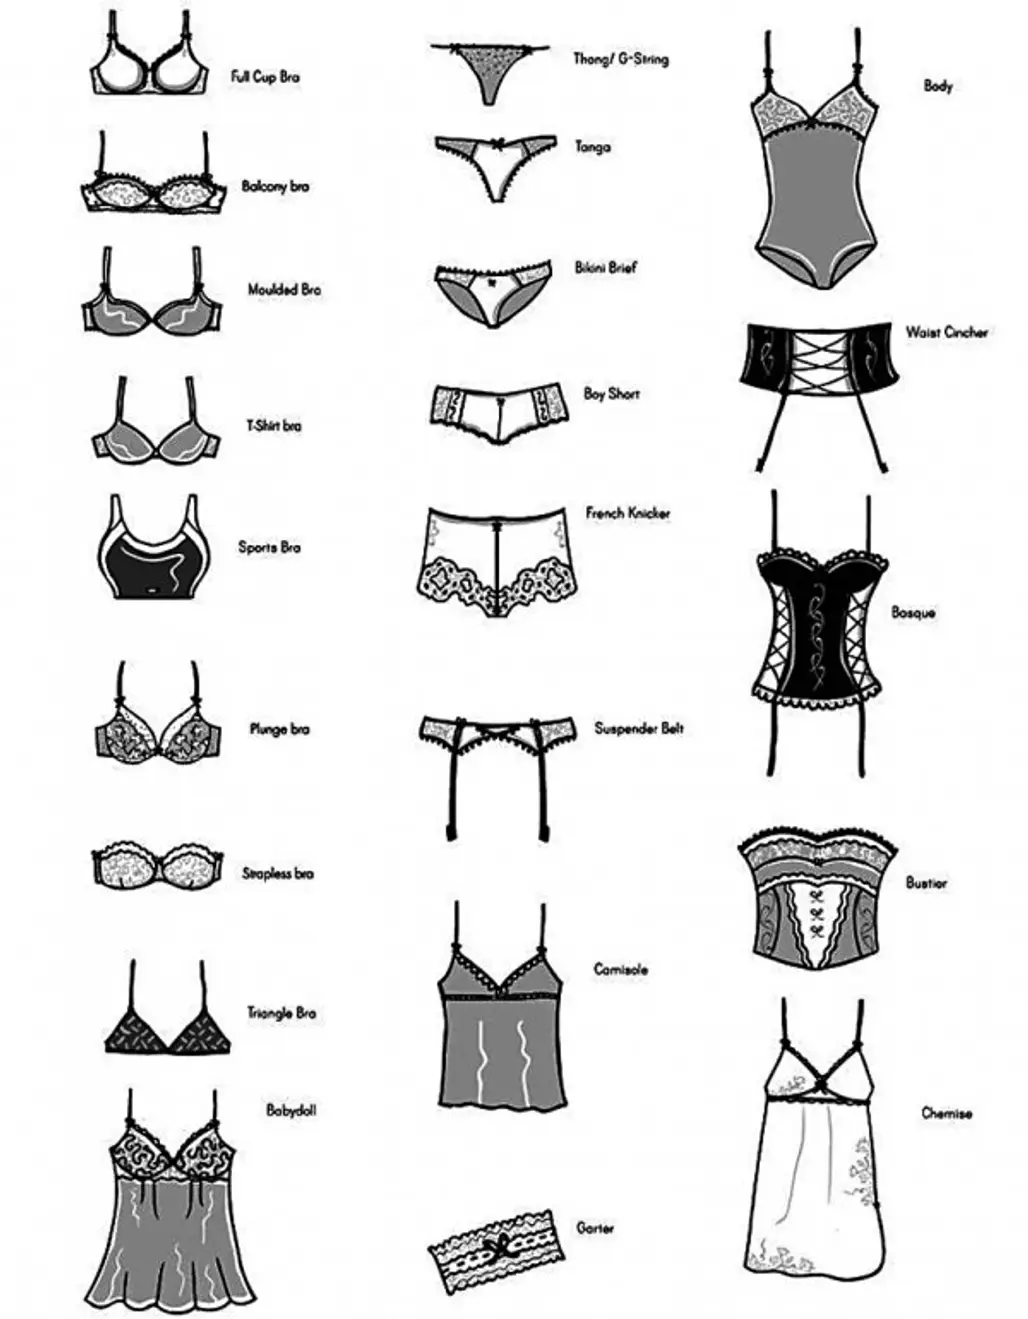 Know Everything There is to Know about Lingerie with These